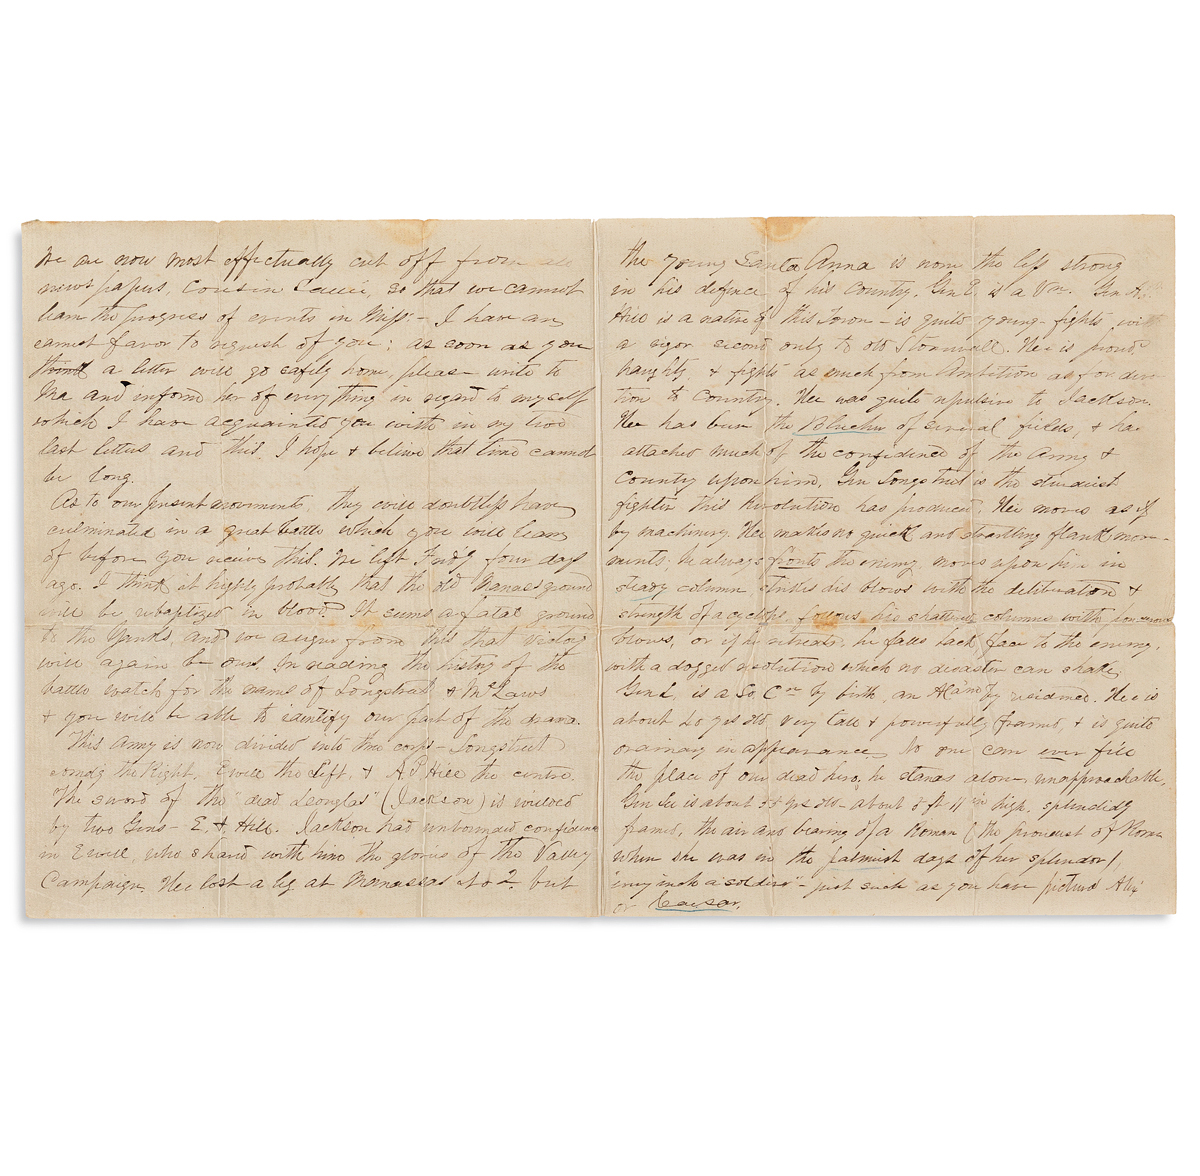 (CIVIL WAR--CONFEDERATE.) Robert T. Crenshaw. Letter by a Mississippi soldier describing generals Lee and Longstreet.